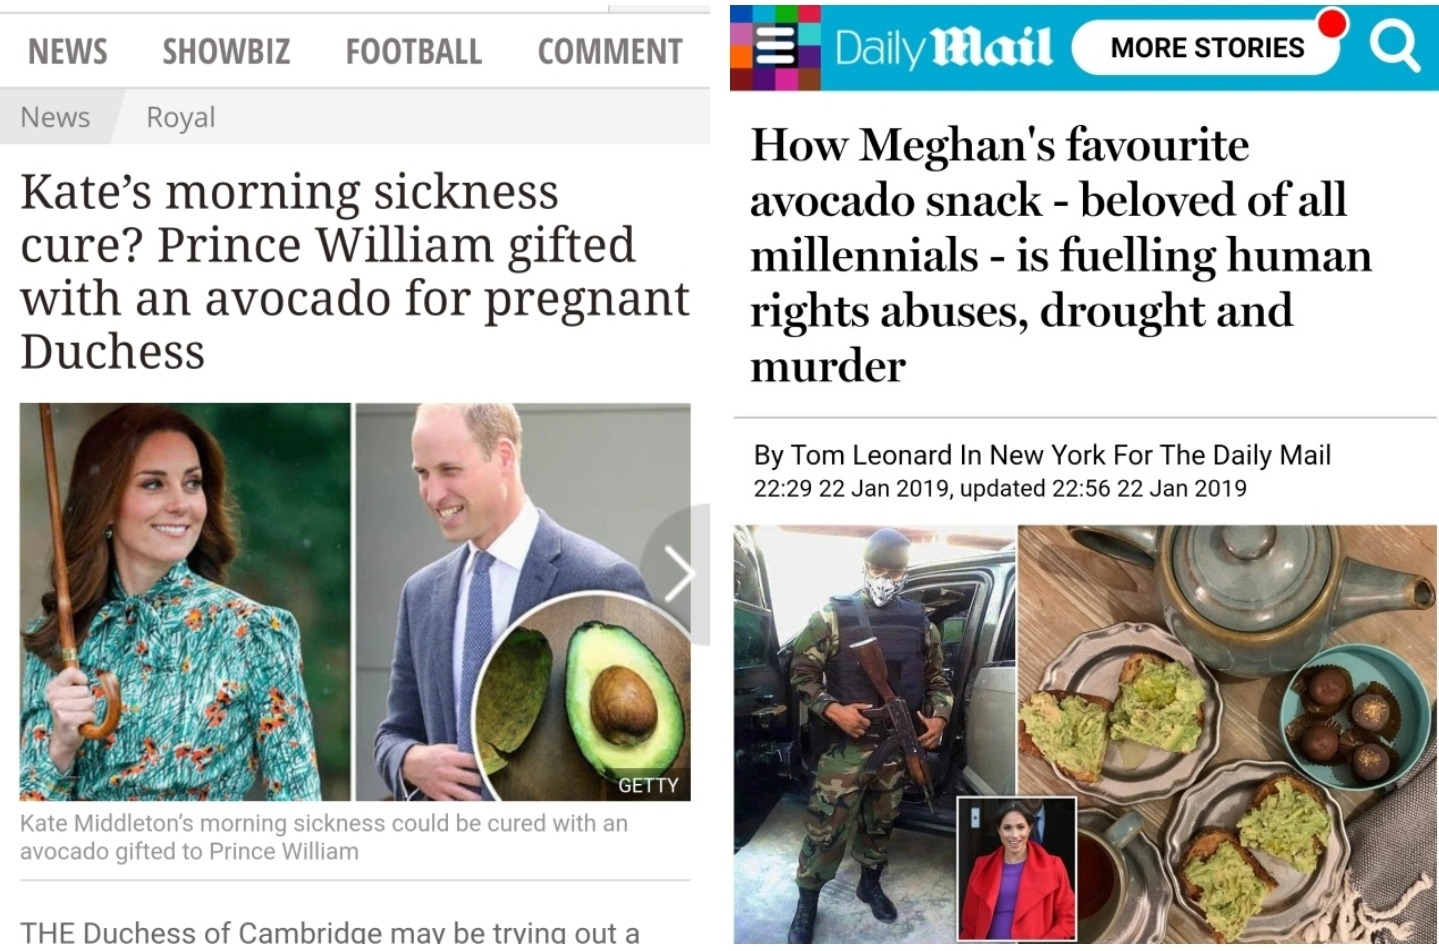 daily mail - Daily Mail More Stories More Stories News Showbiz Football Comment News Royal Kate's morning sickness cure? Prince William gifted with an avocado for pregnant Duchess How Meghan's favourite avocado snack beloved of all millennials is fuelling